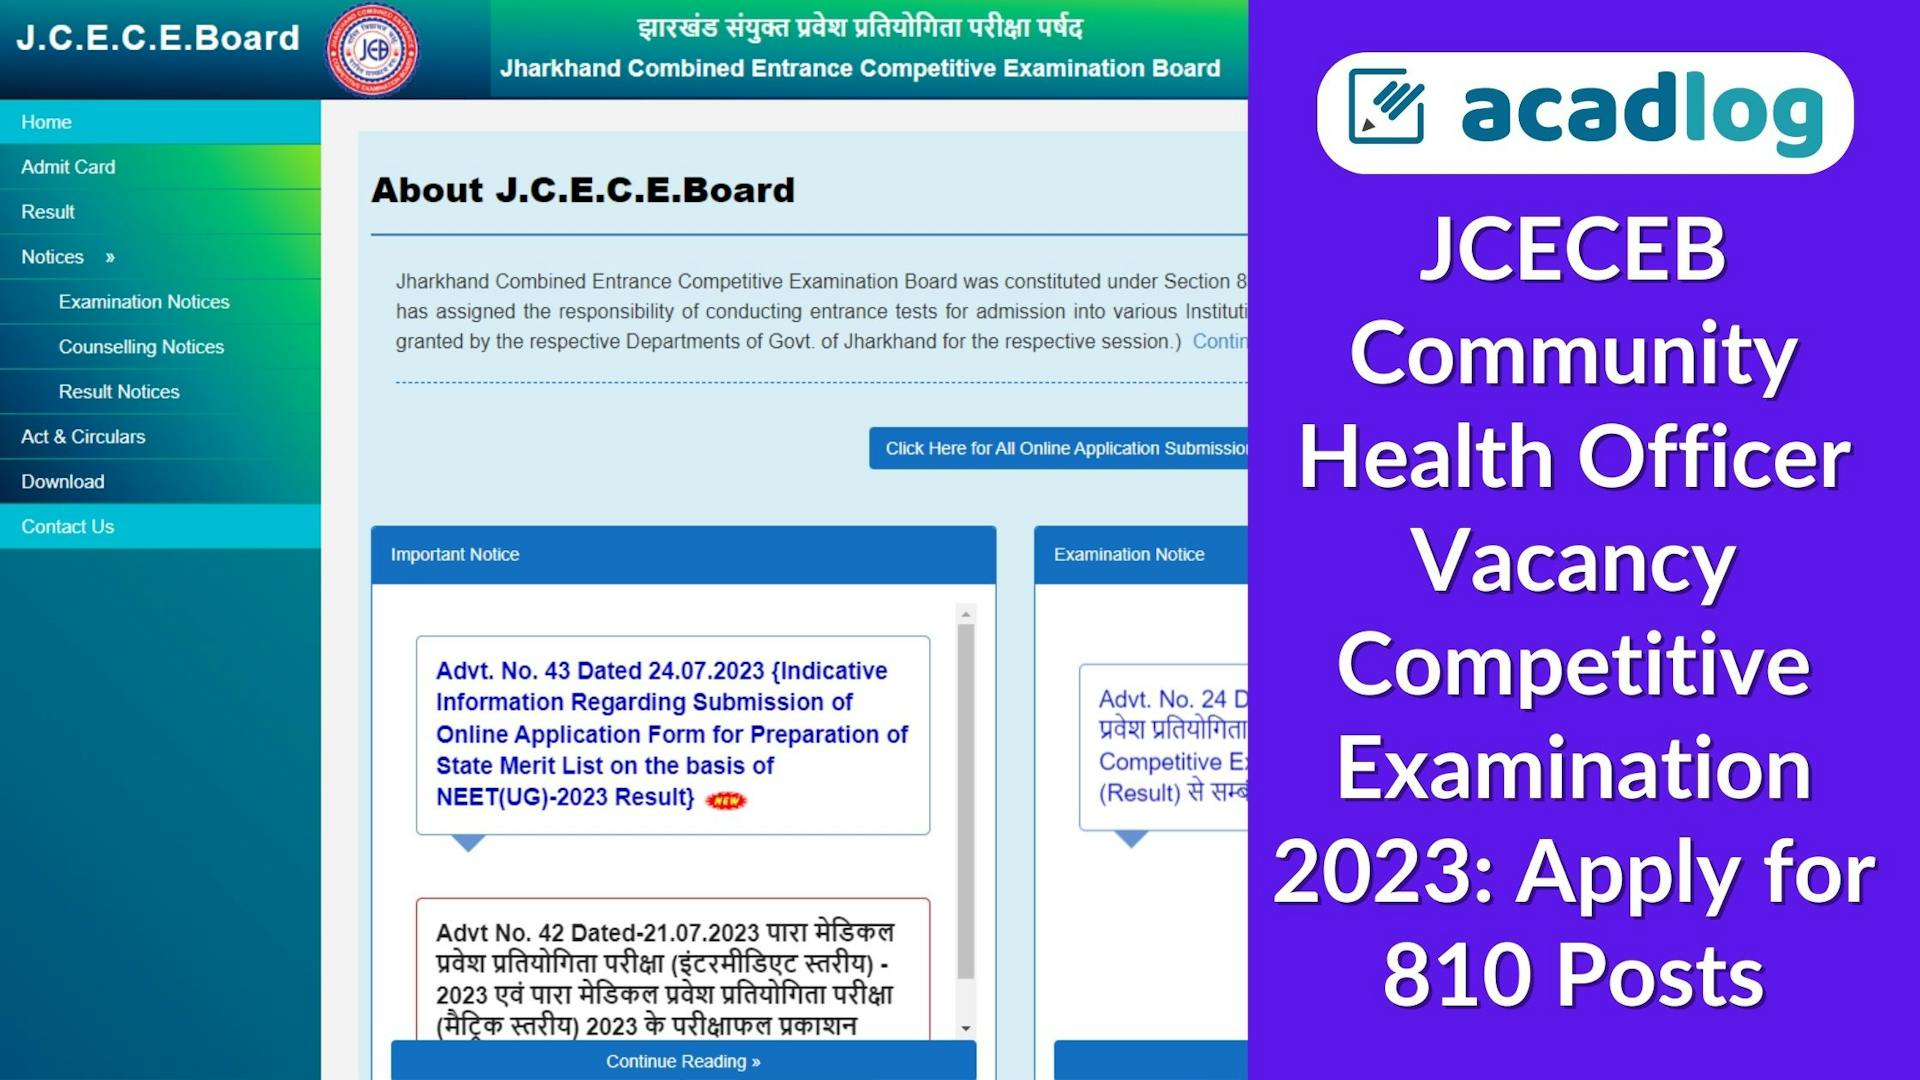 JCECEB Community Health Officer Vacancy Competitive Examination 2023: Apply for 810 Posts